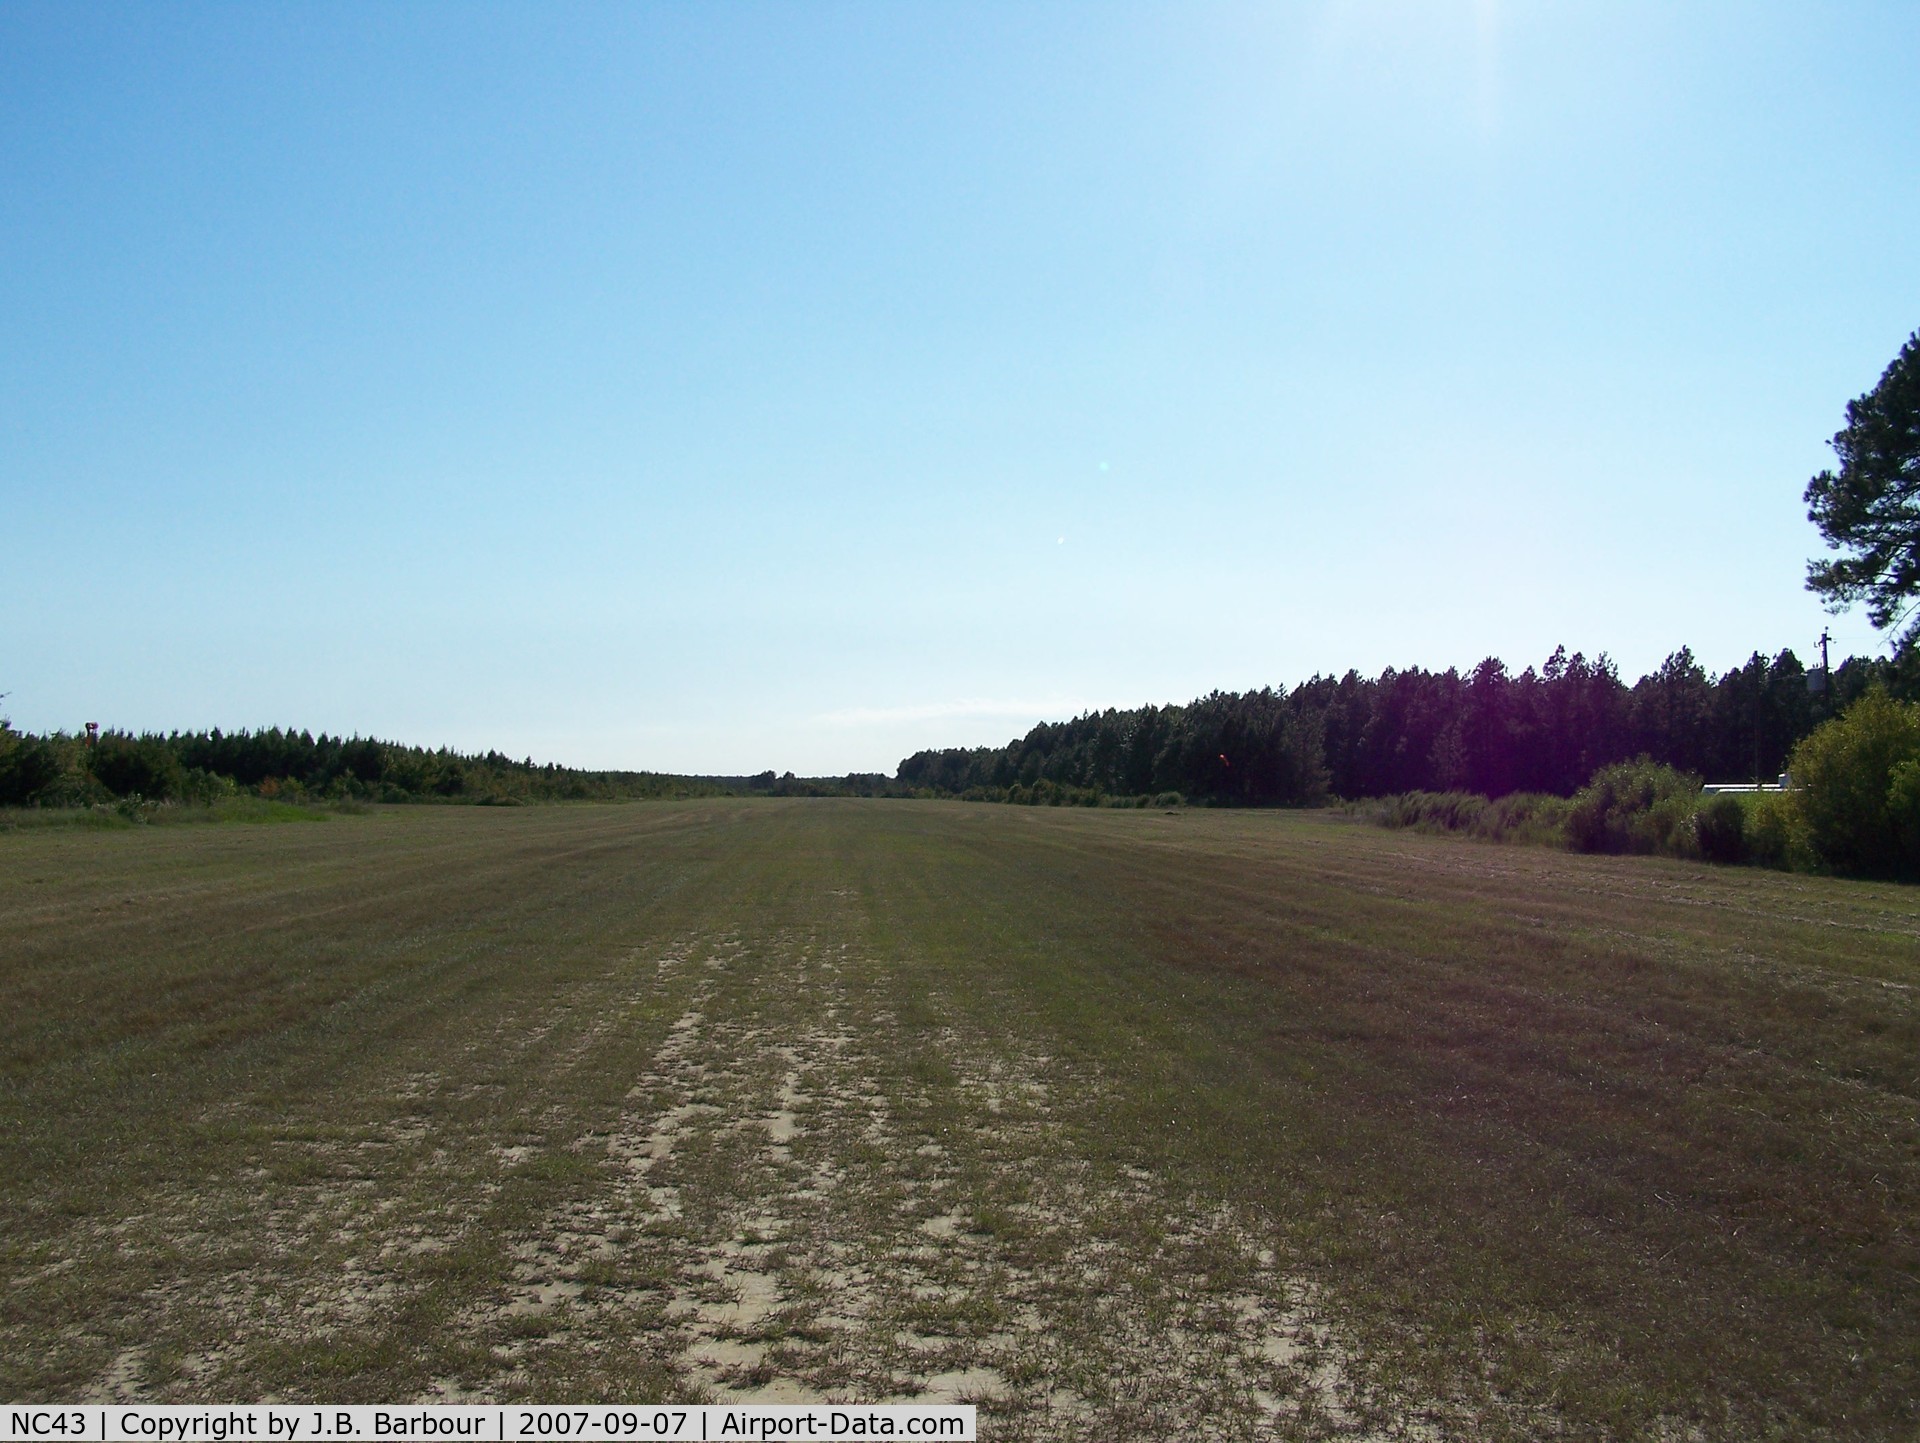 Bear Pen Airport (NC43) - This location appeared to have two runways.  The other one can't been seen